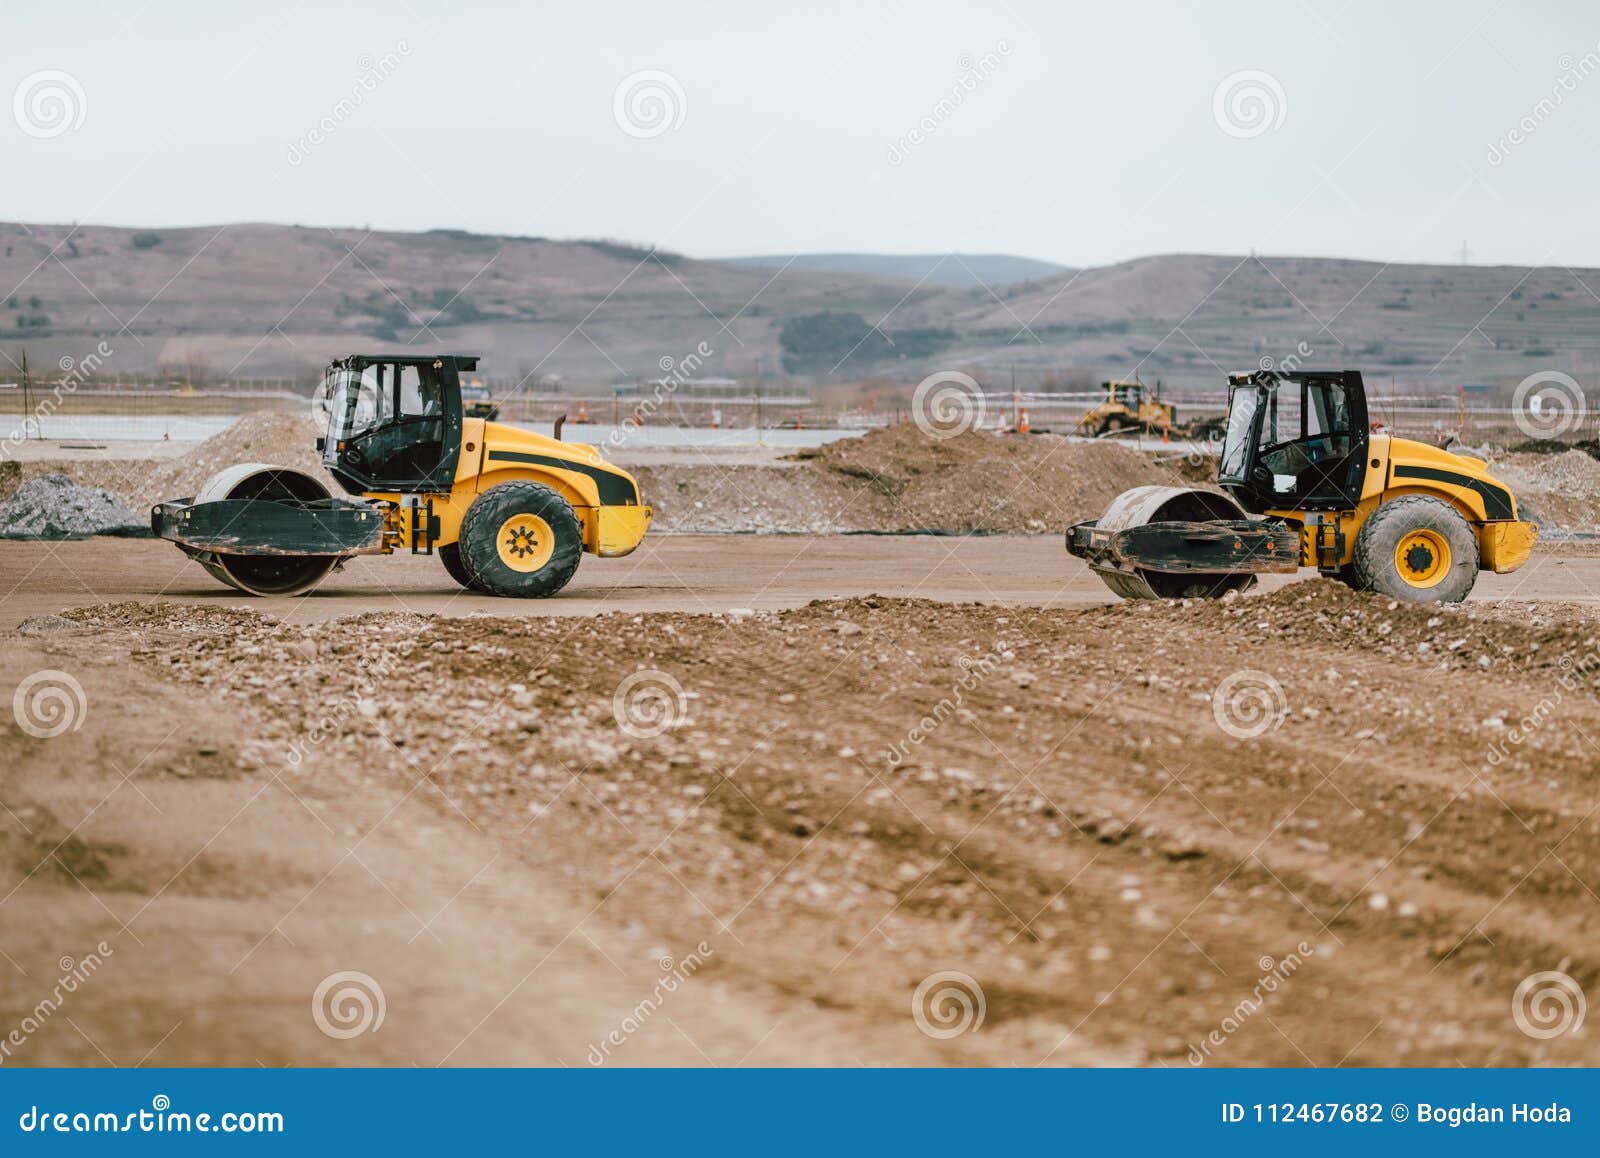 two vibratory soil compactors during road and highway construction. industrial roadworks with heavy-duty machinery in construction